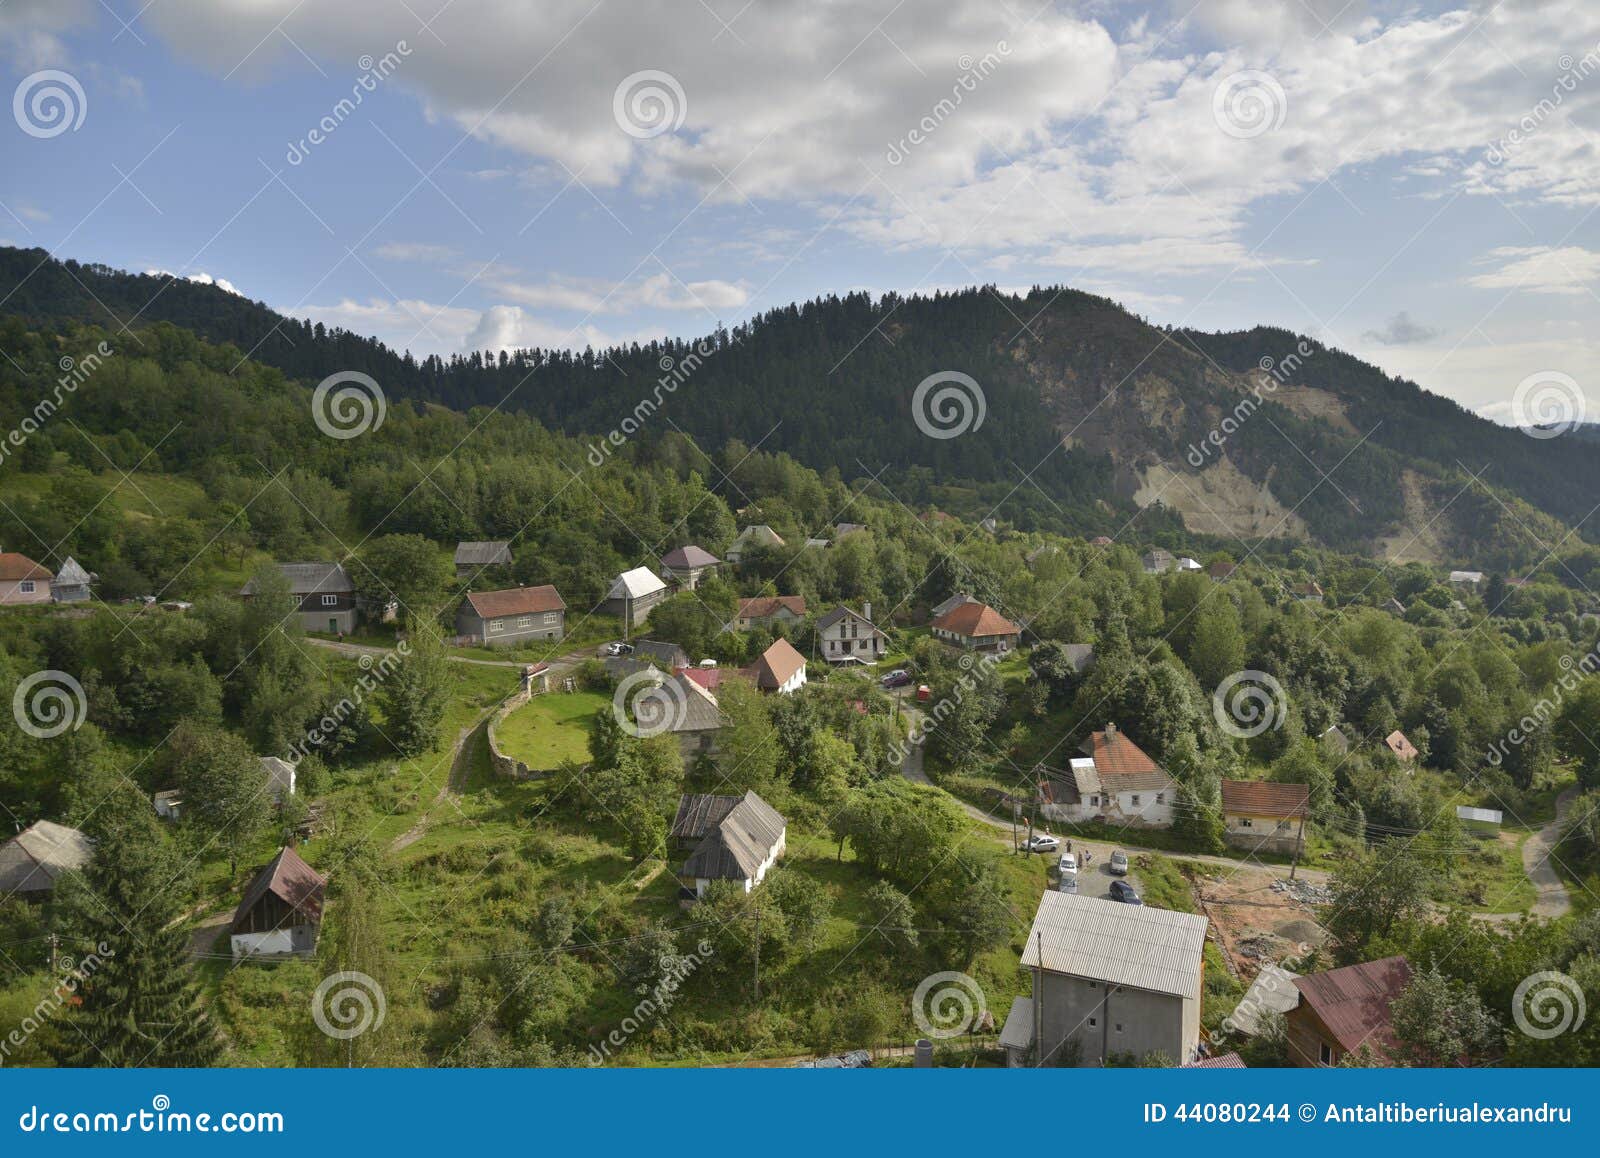 landscape with houses at rosia montana, romania, europe